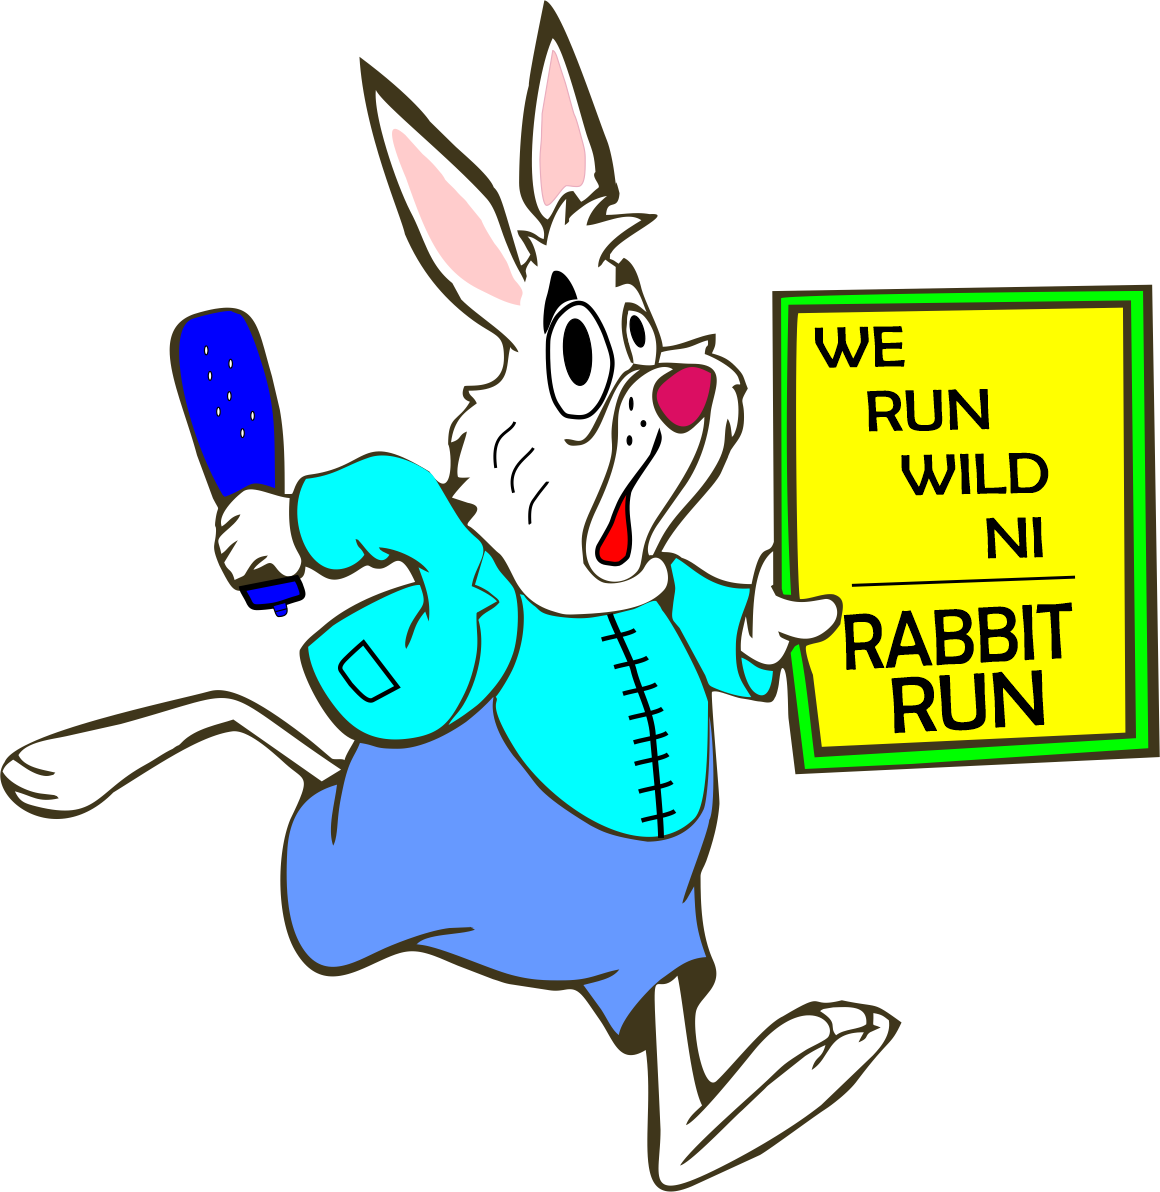 RABBIT RUN 4th February 2023 (LATE ENTRY) Rescheduled date